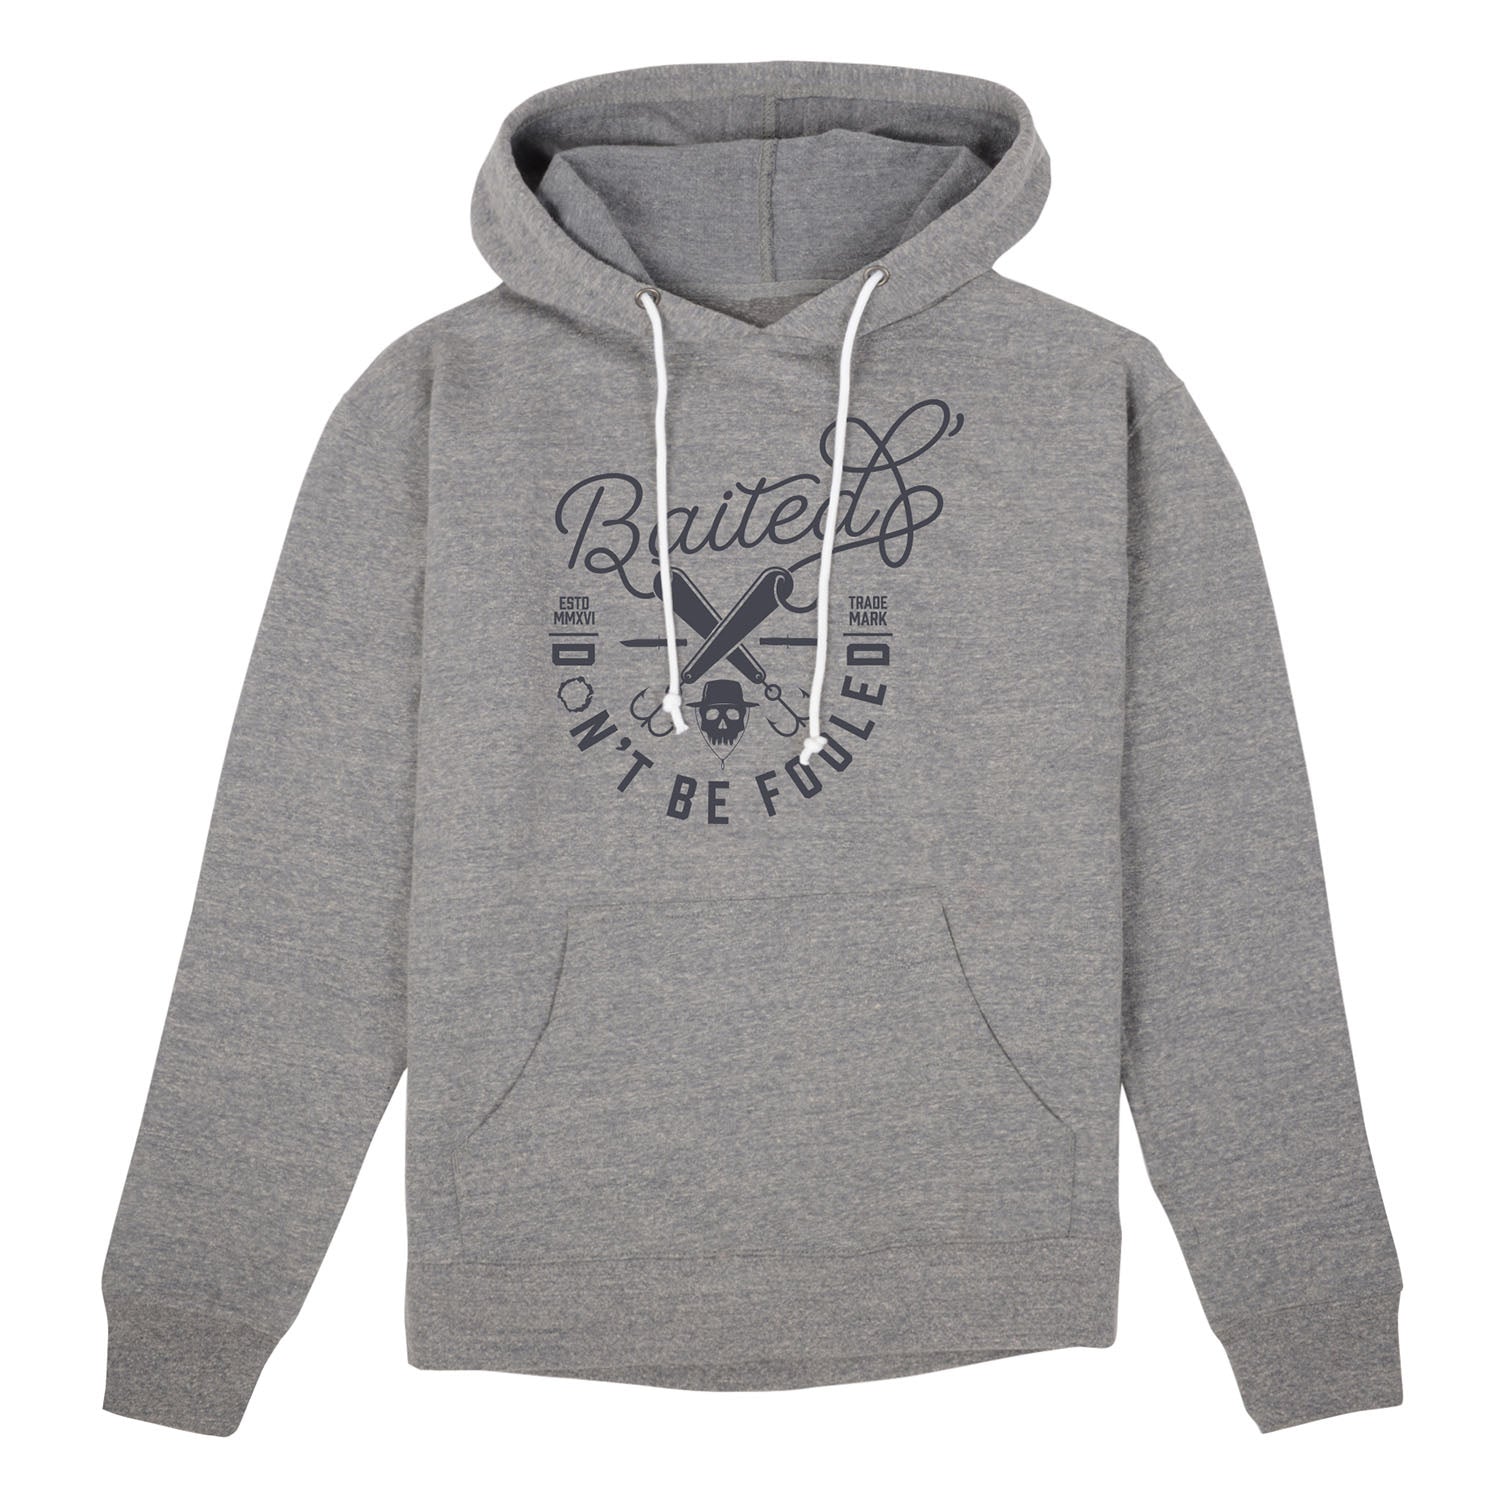 Call of Duty Baited Grey Hoodie - Front View